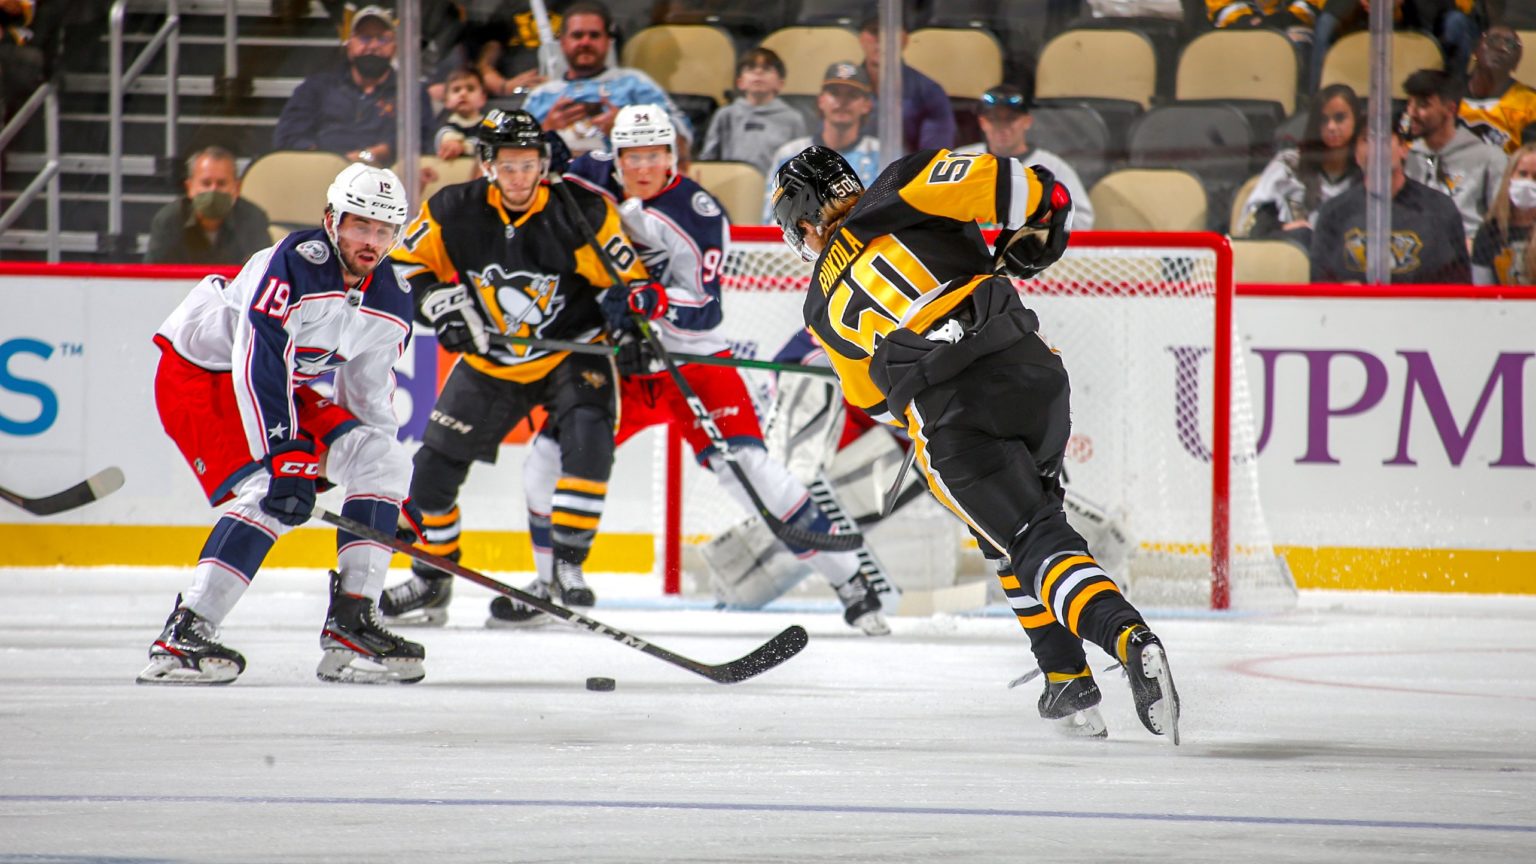 Despite the 3-0 loss, the Pittsburgh Penguins played extremely well.